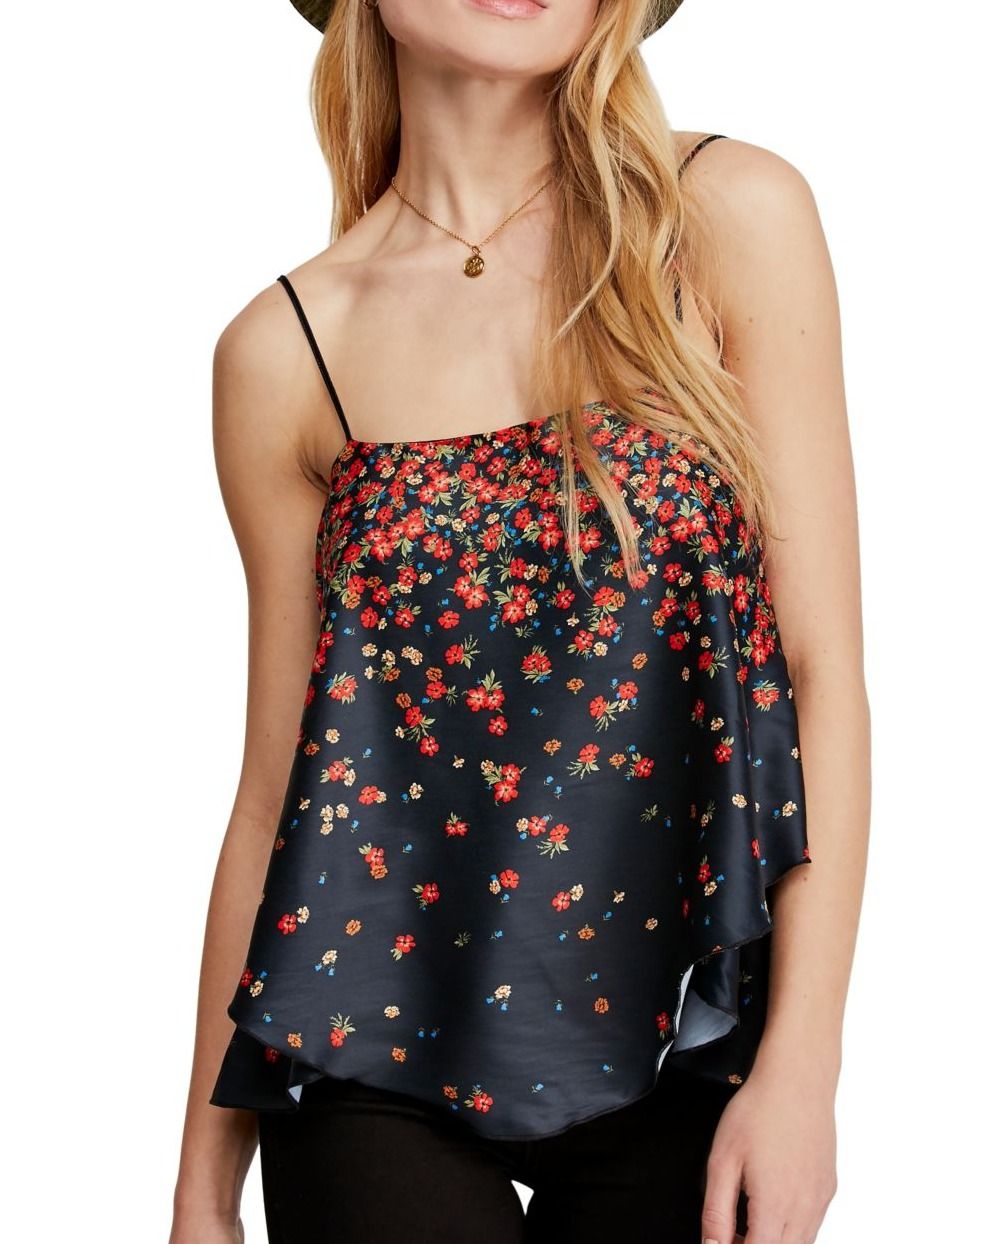 Color: Blacks Size Type: Regular Size (Women's): XS Sleeve Length: Sleeveless Type: Tank Style: Tank, Cami Neckline: Square Neck Pattern: Floral Theme: Classic Material: 100% Polyester